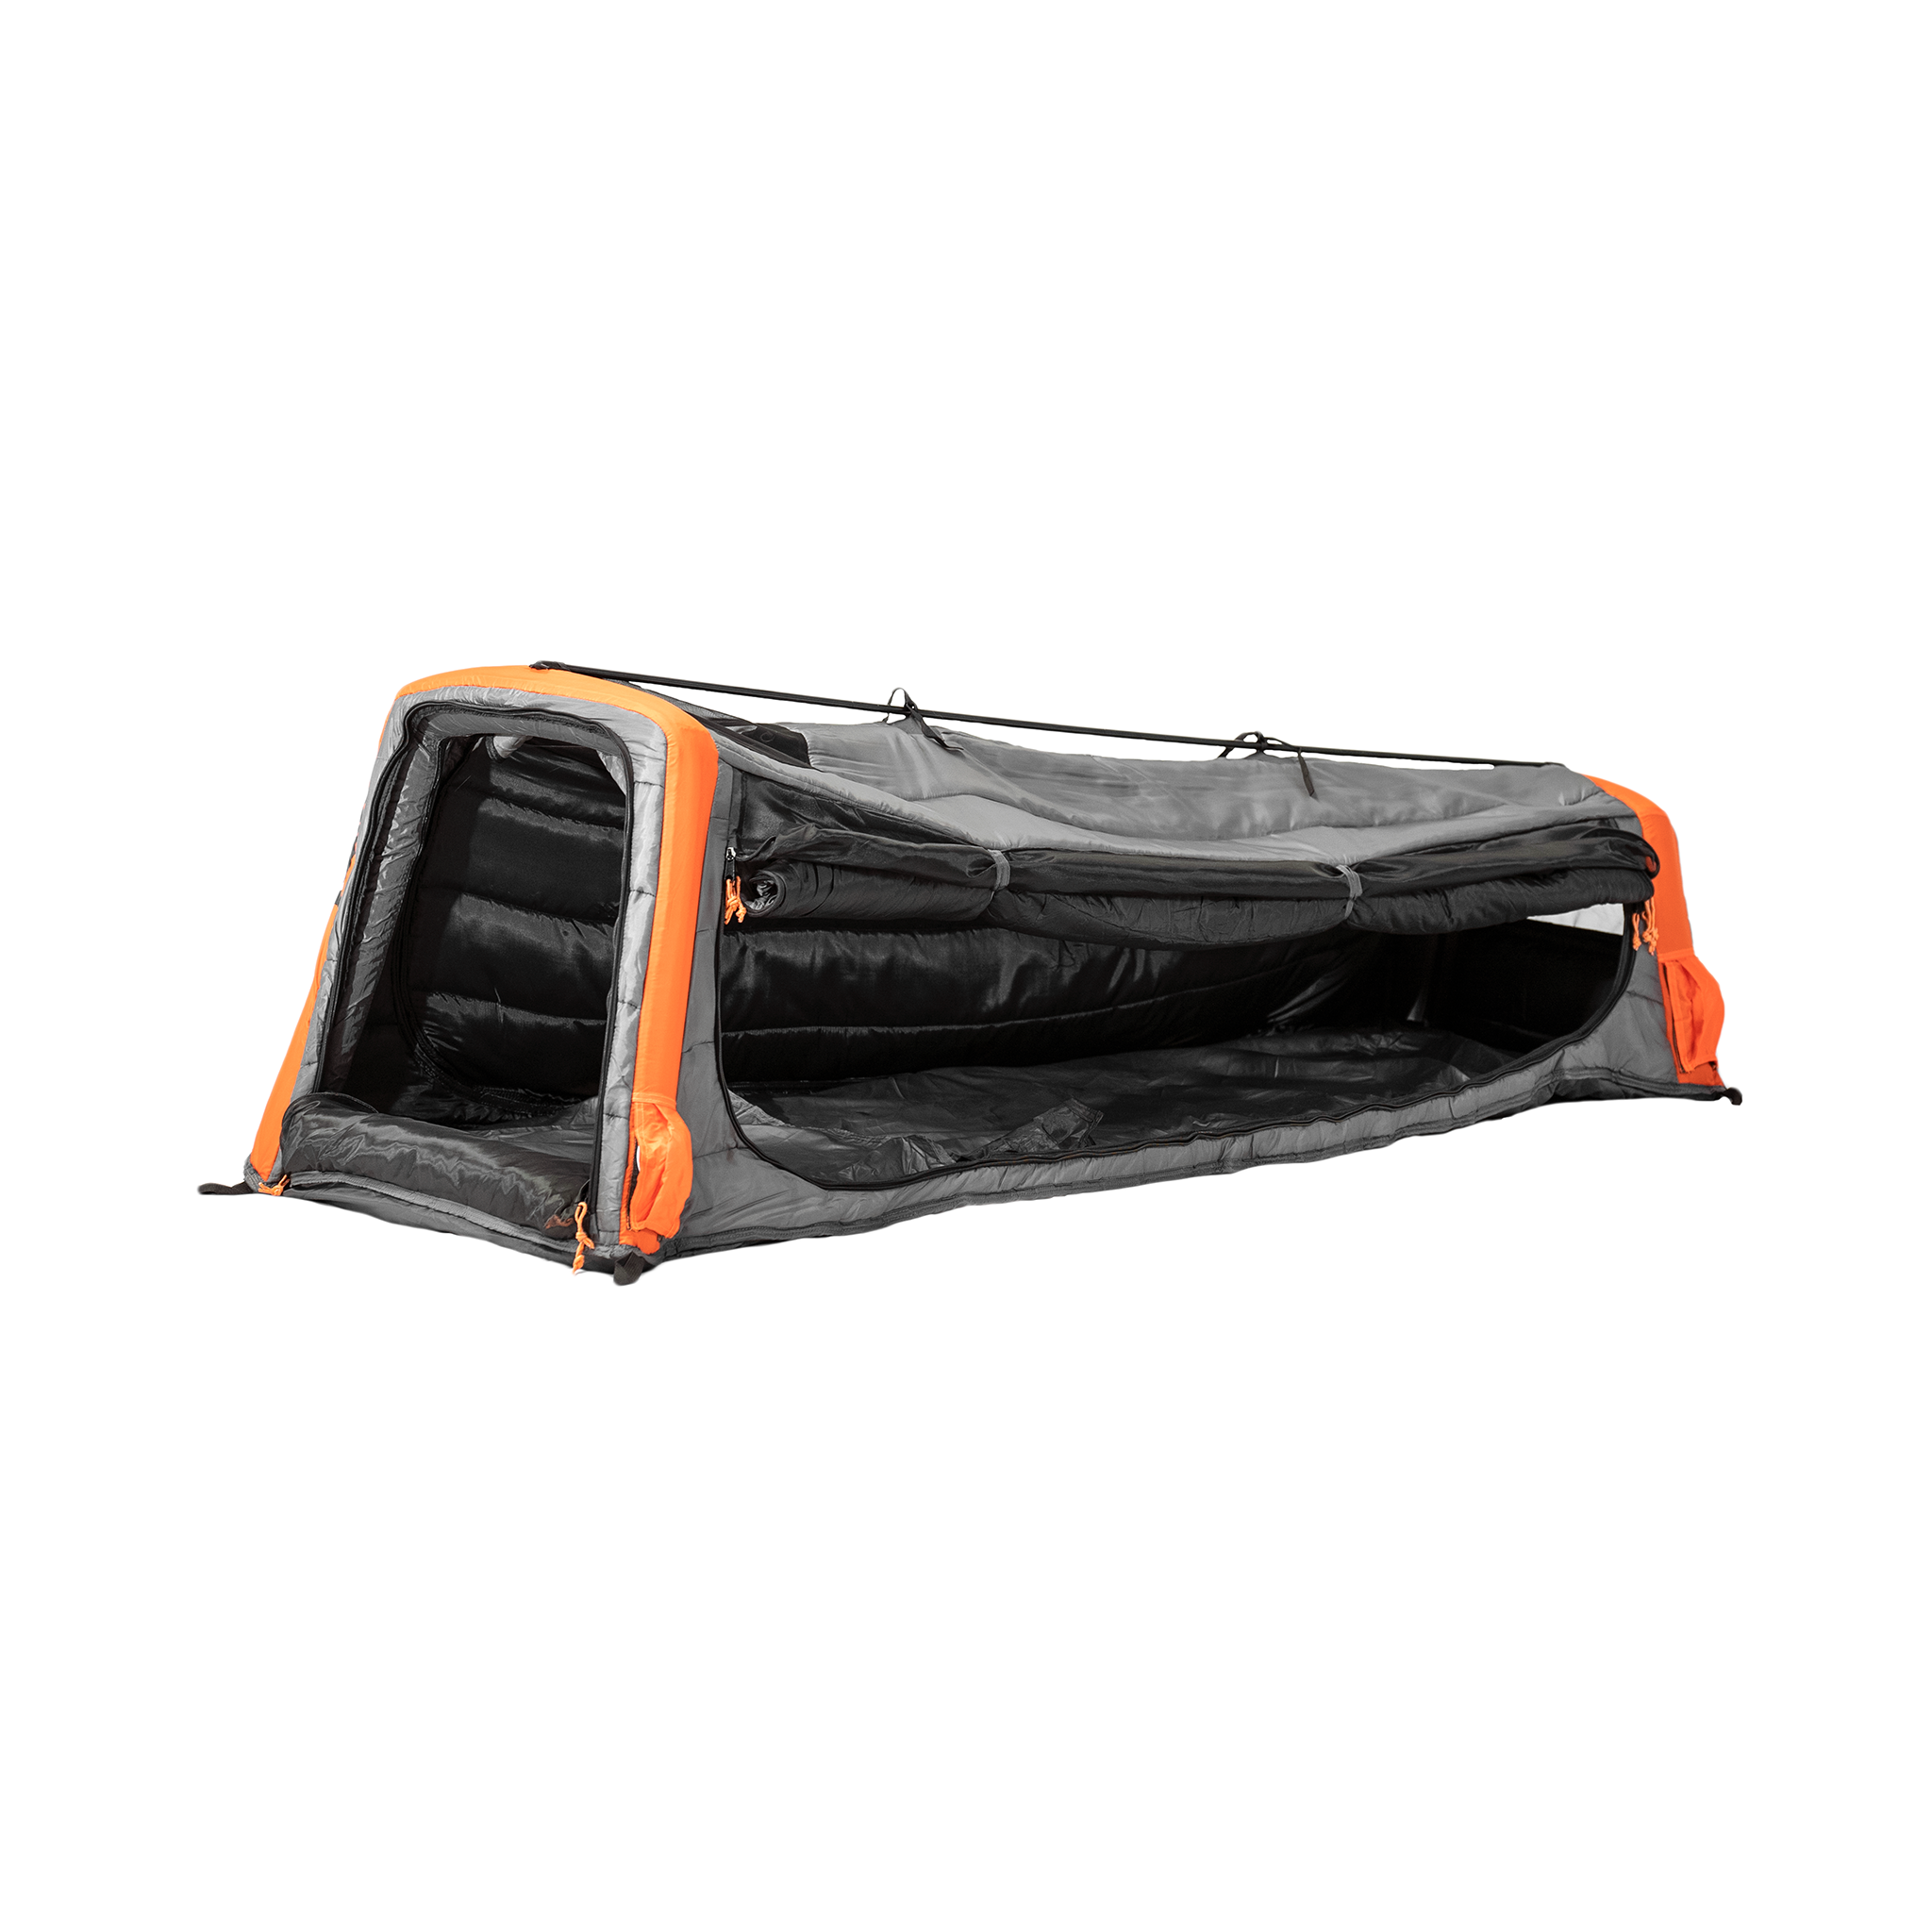 Crua Culla Haul - Rooftop Tent Inner Insulated Lining - Temperature, Noise  & Light Insulated Tent